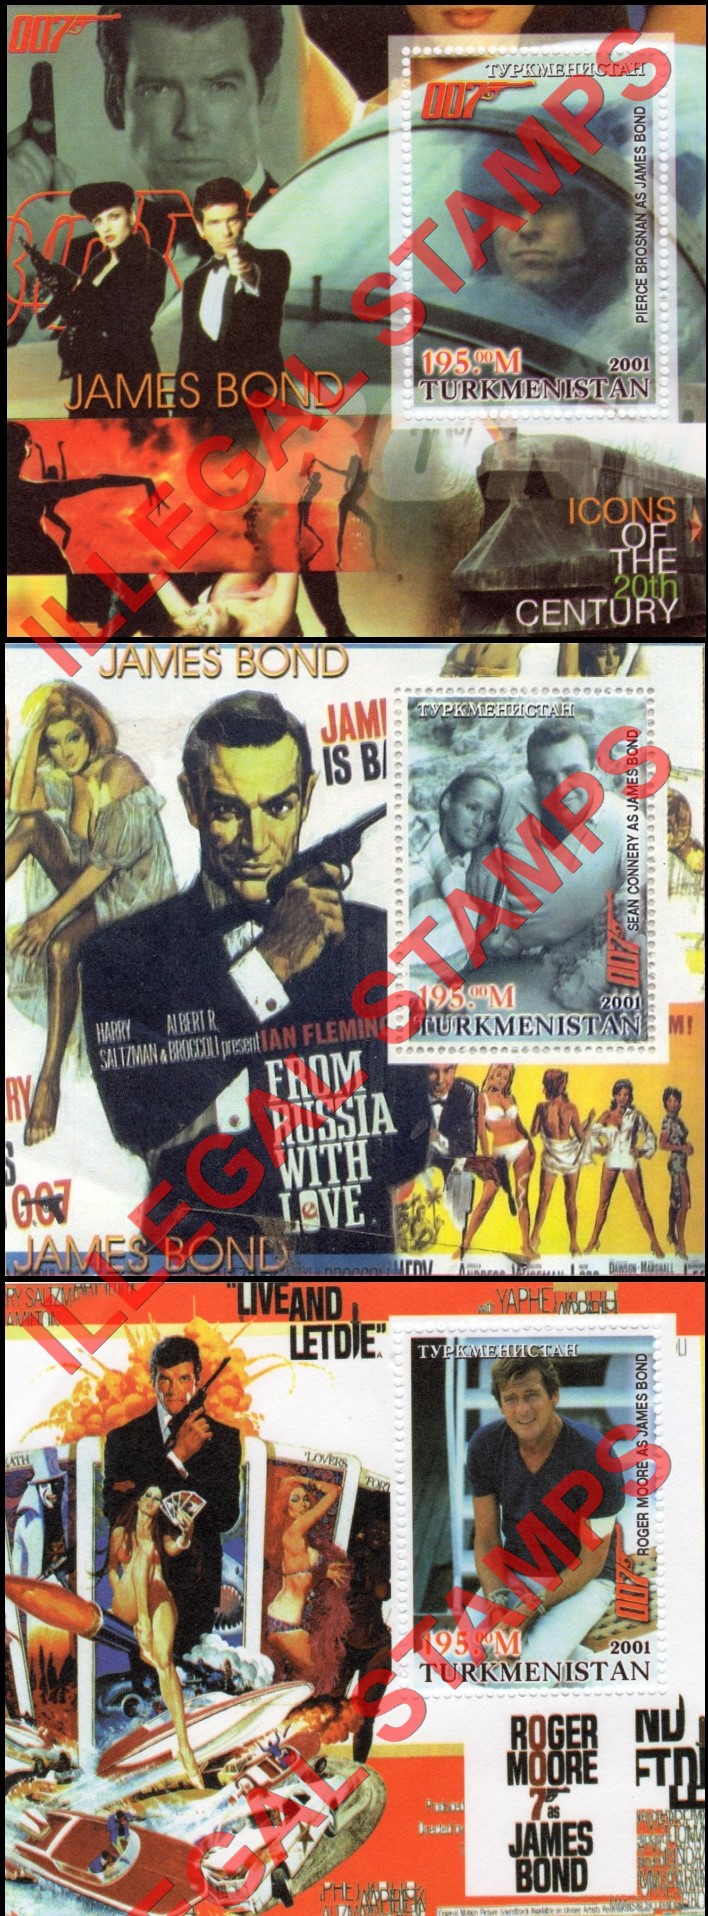 Turkmenistan 2001 Icons of the 20th Century James Bond Illegal Stamp Souvenir Sheets of 1